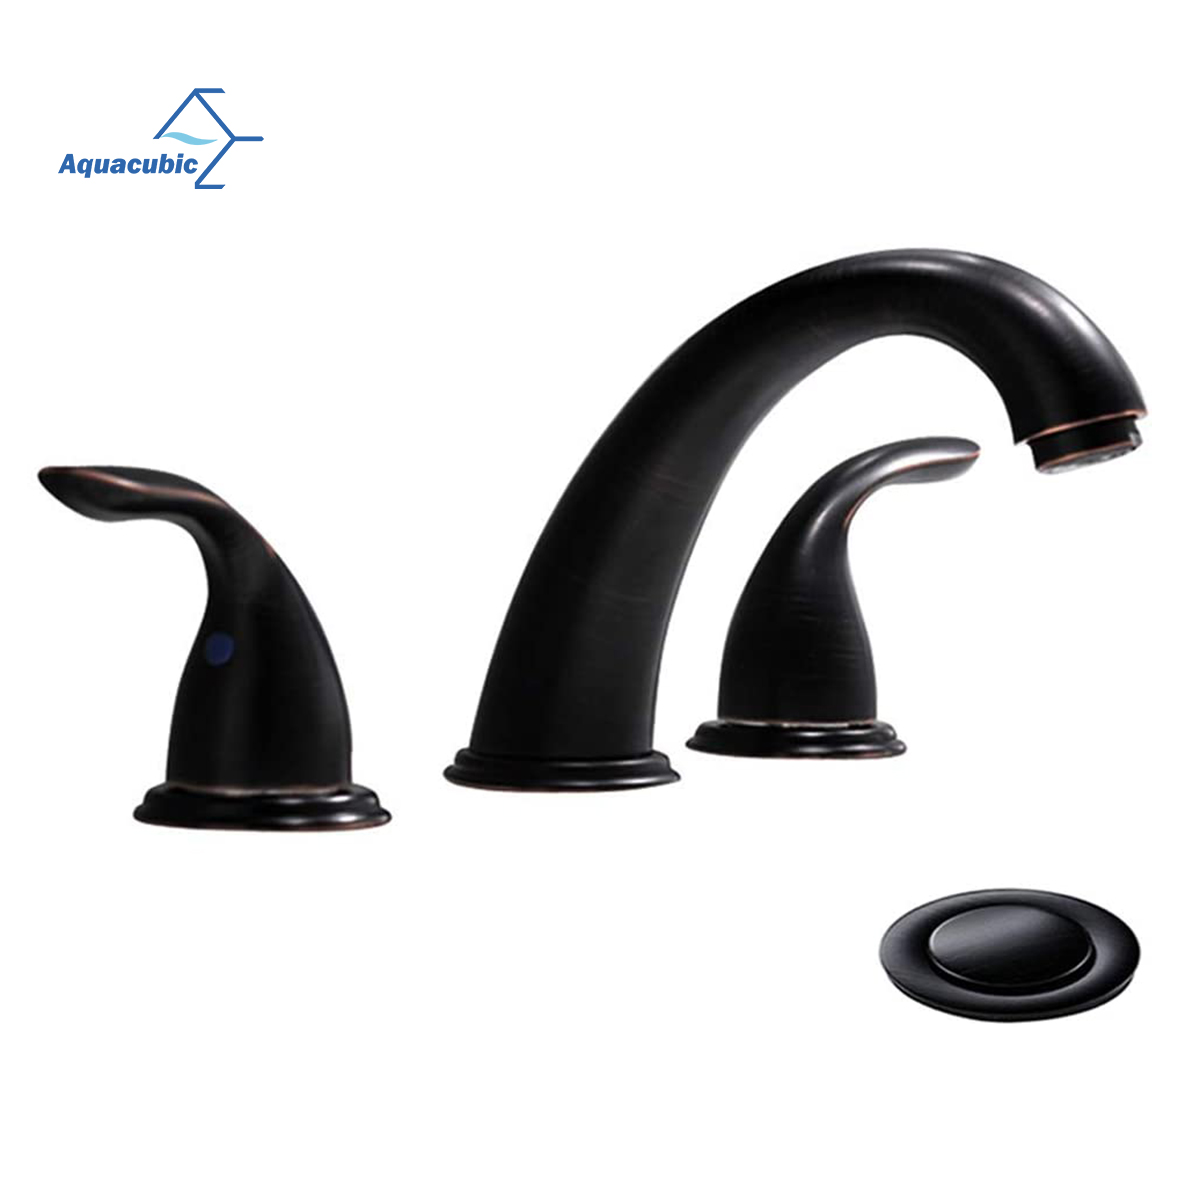 Widespread Noble Industrial Style CUPC Certified Oil Rubbed Black 3 Hole Bathroom Basin Faucets